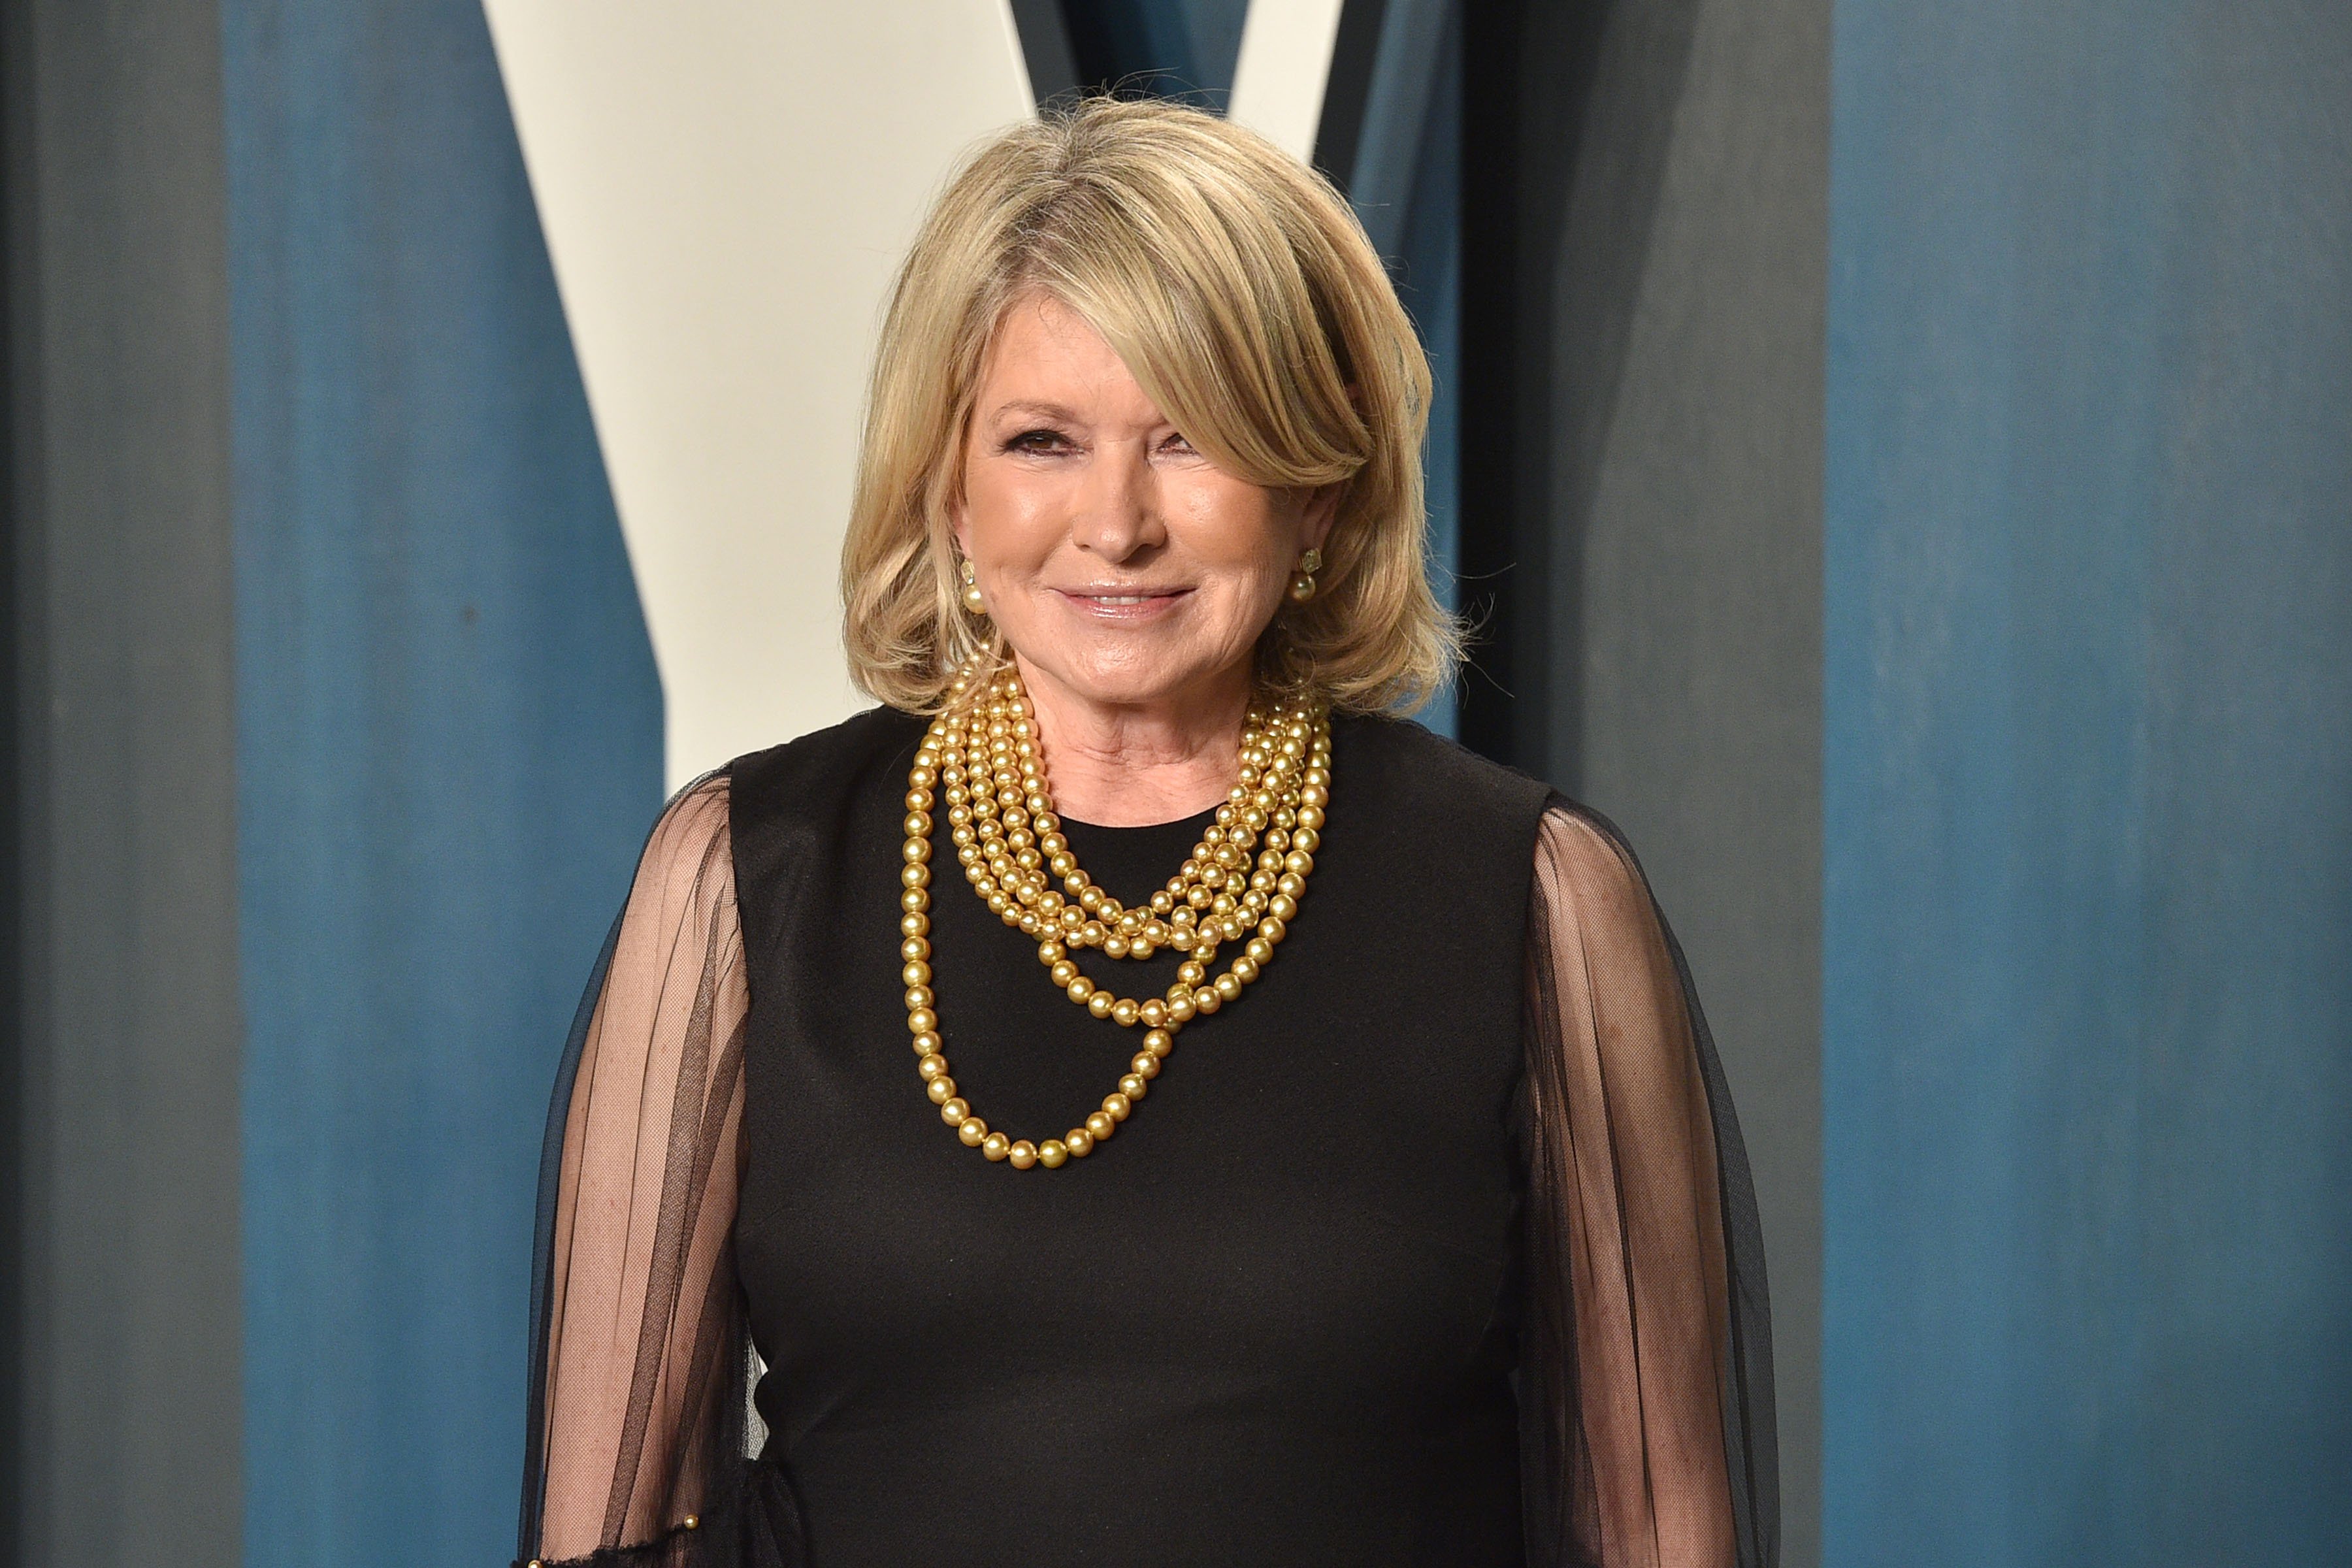 Martha Stewart attends the 2020 Vanity Fair Oscar Party at Wallis Annenberg Center for the Performing Arts on February 9, 2020 in Beverly Hills, California | Source: Getty Images